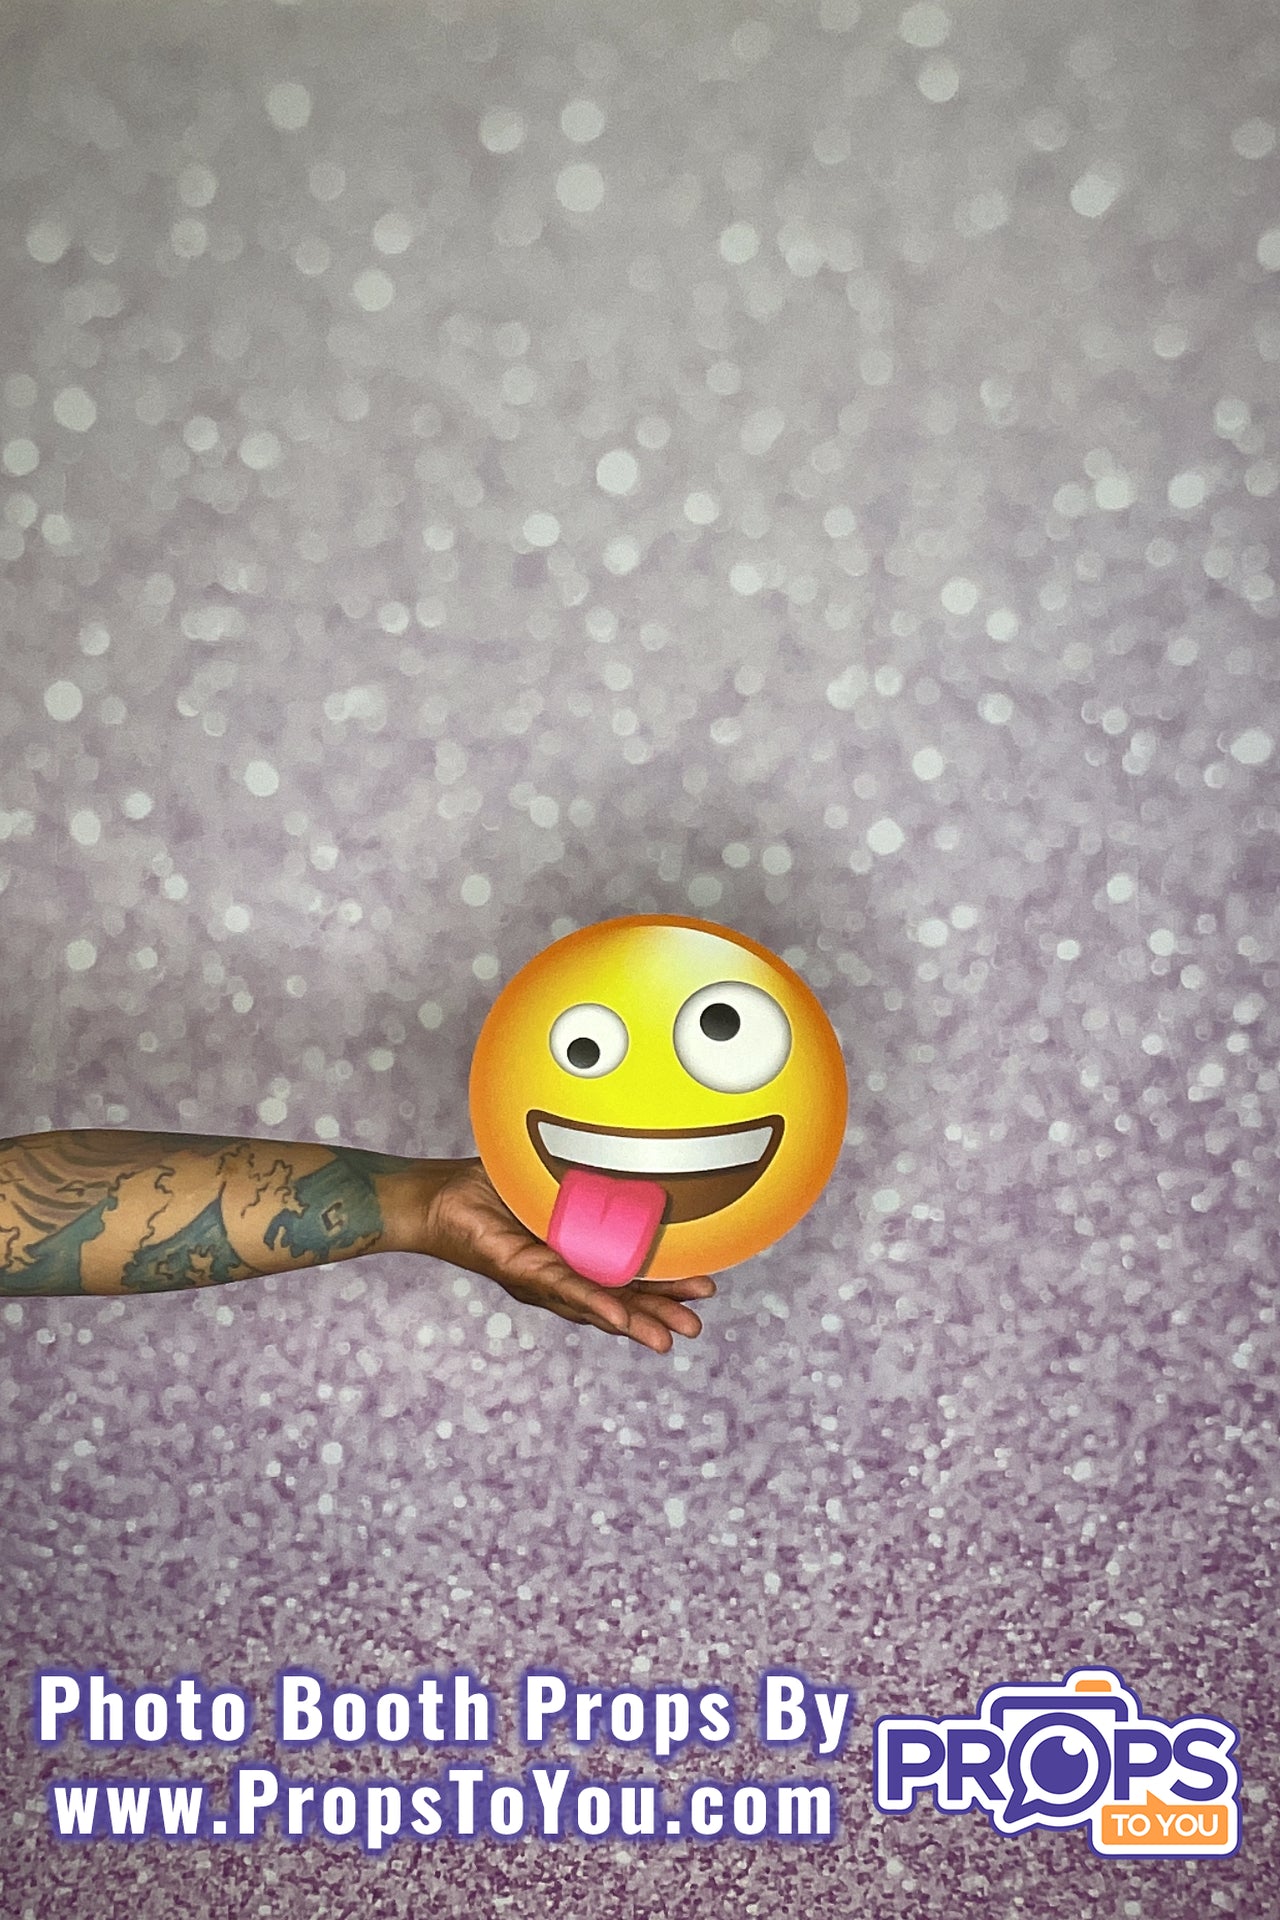 Emoji 3: Bundle 5 Double-Sided Photo Booth Props